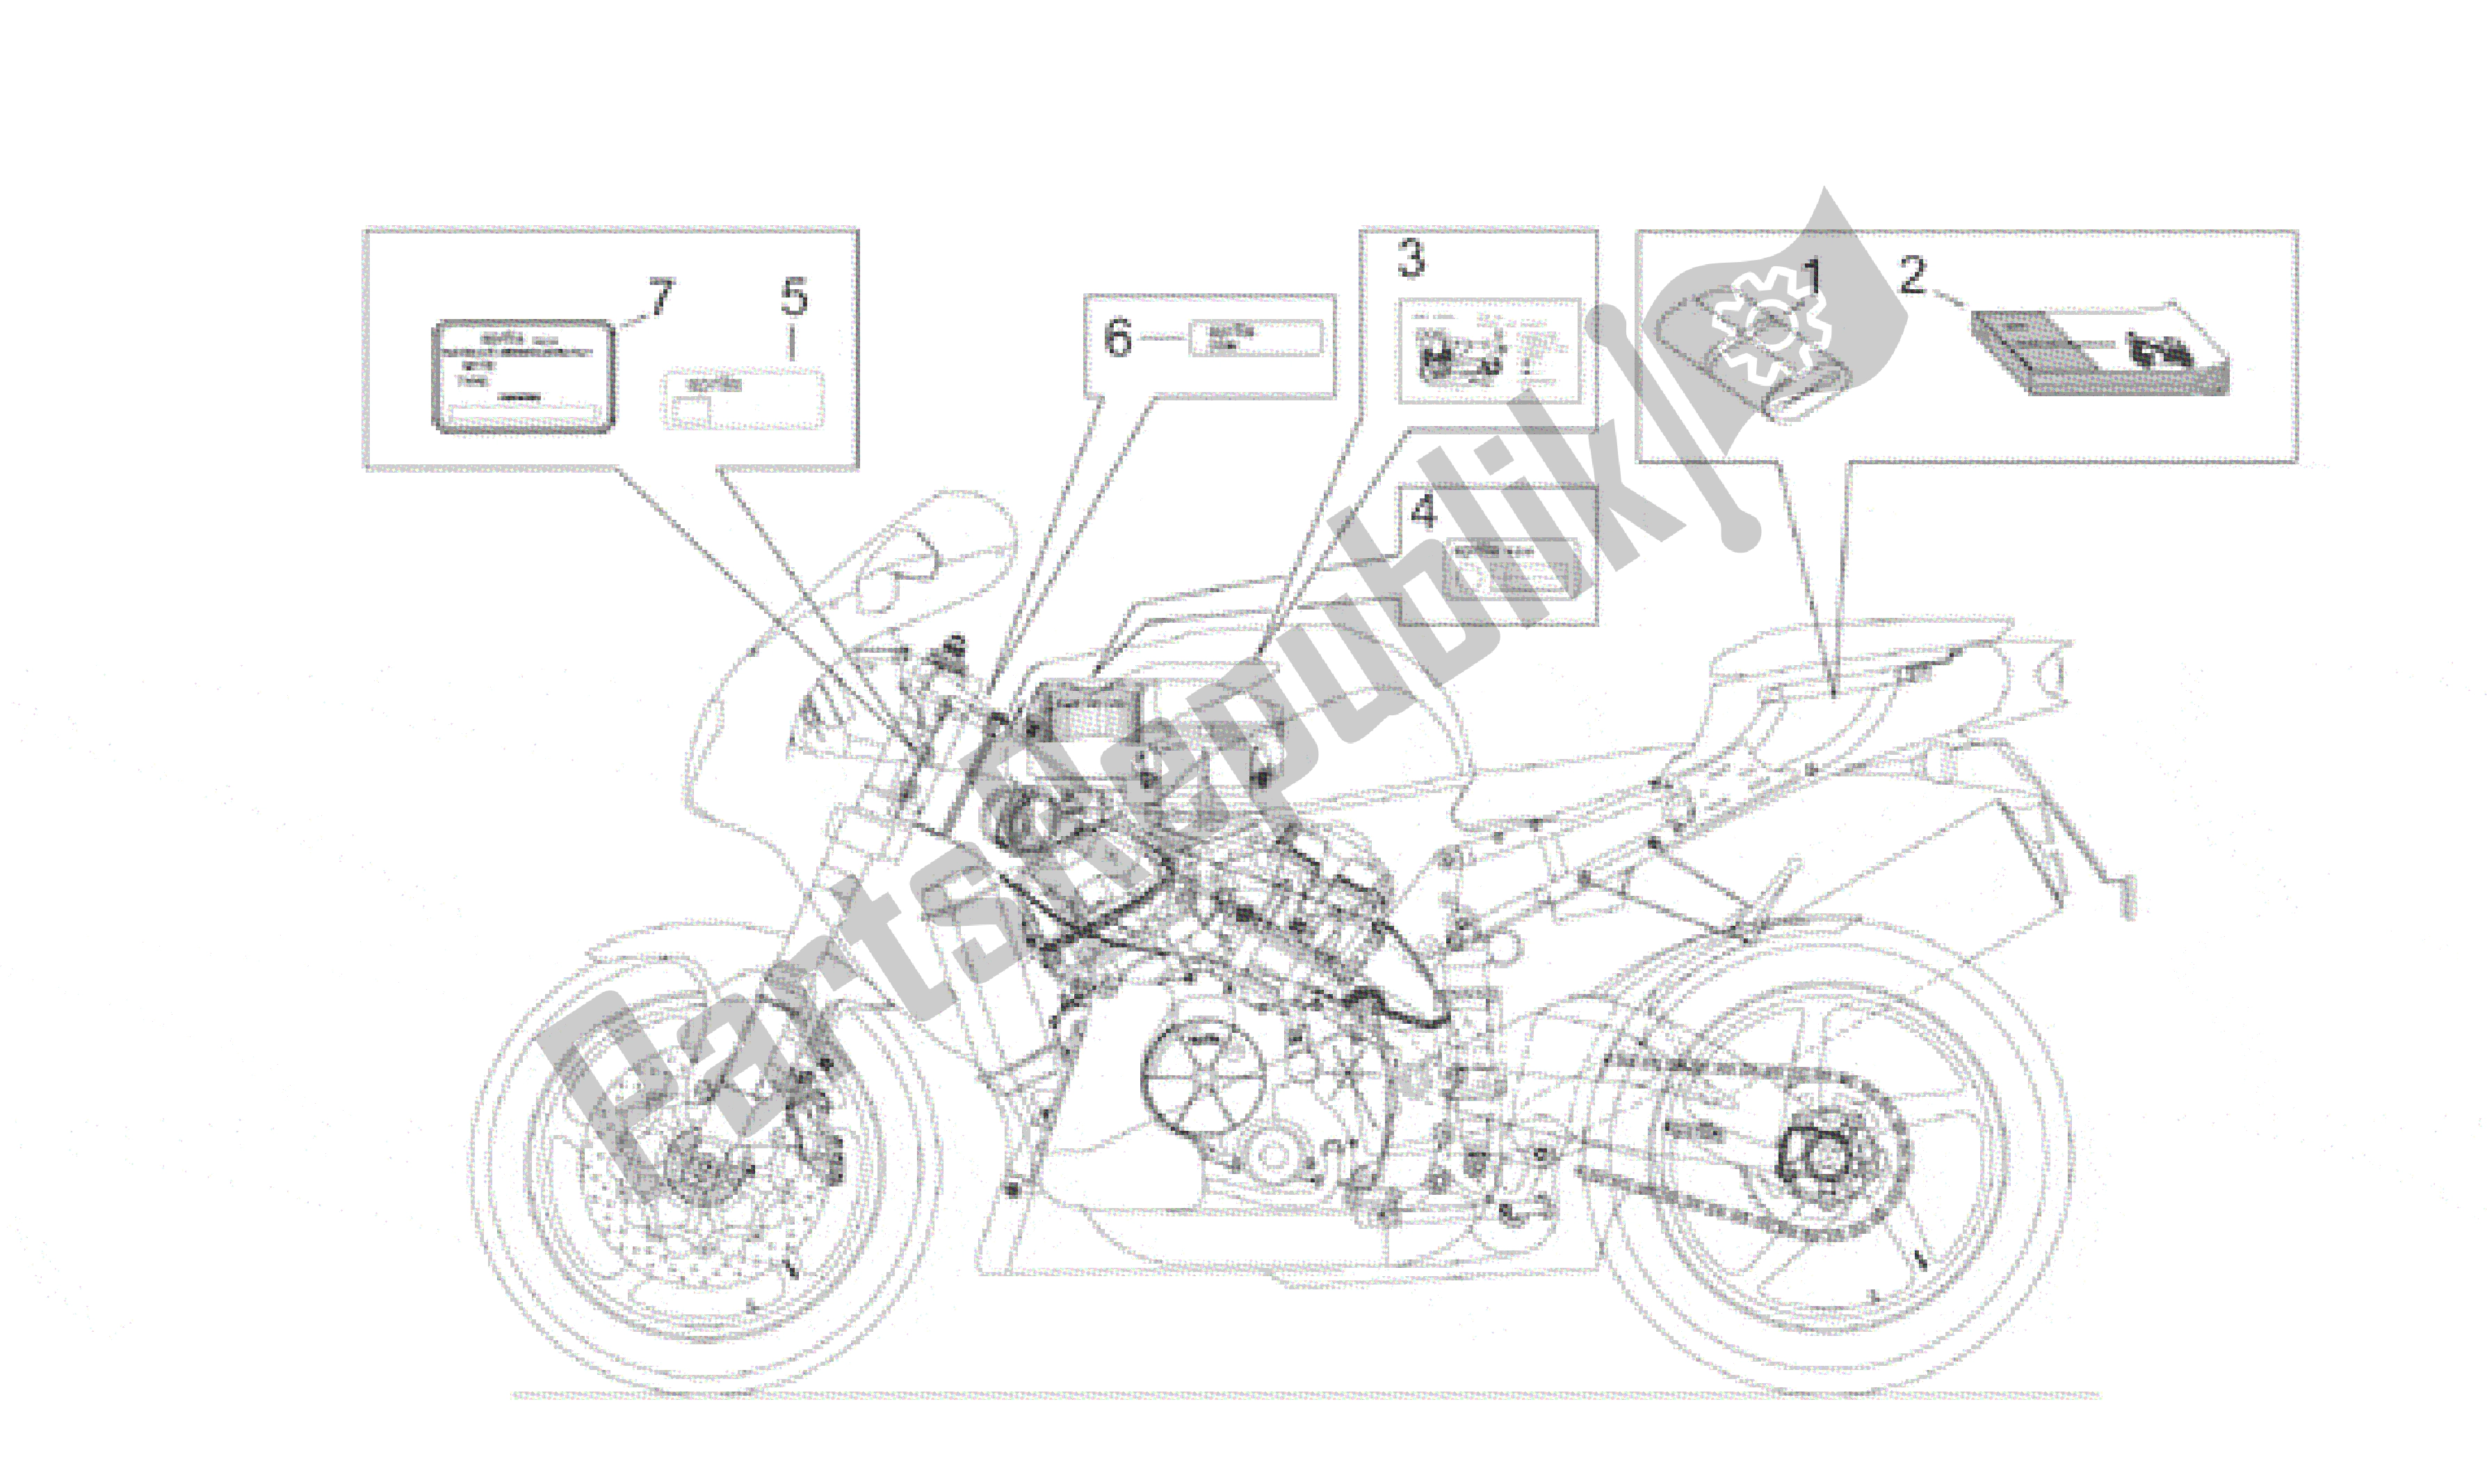 All parts for the Plate Set And Handbook of the Aprilia RSV Mille R 3901 1000 2001 - 2002